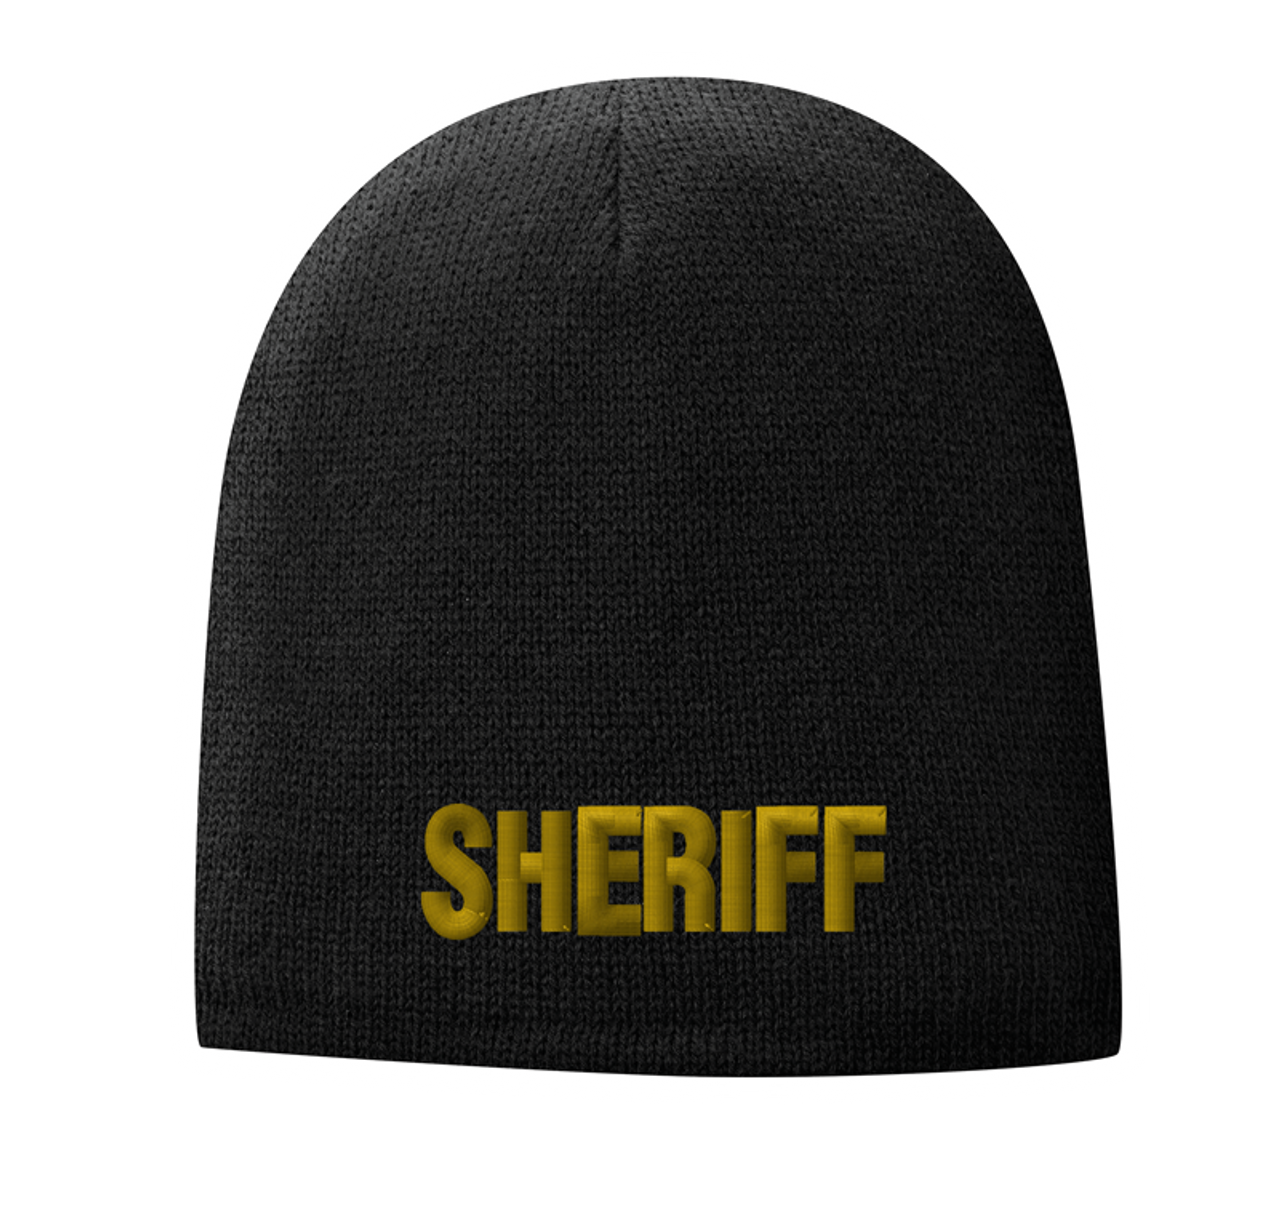 Fleece Lined Black knit cap 9 inch with Sheriff in Marine Gold Thread